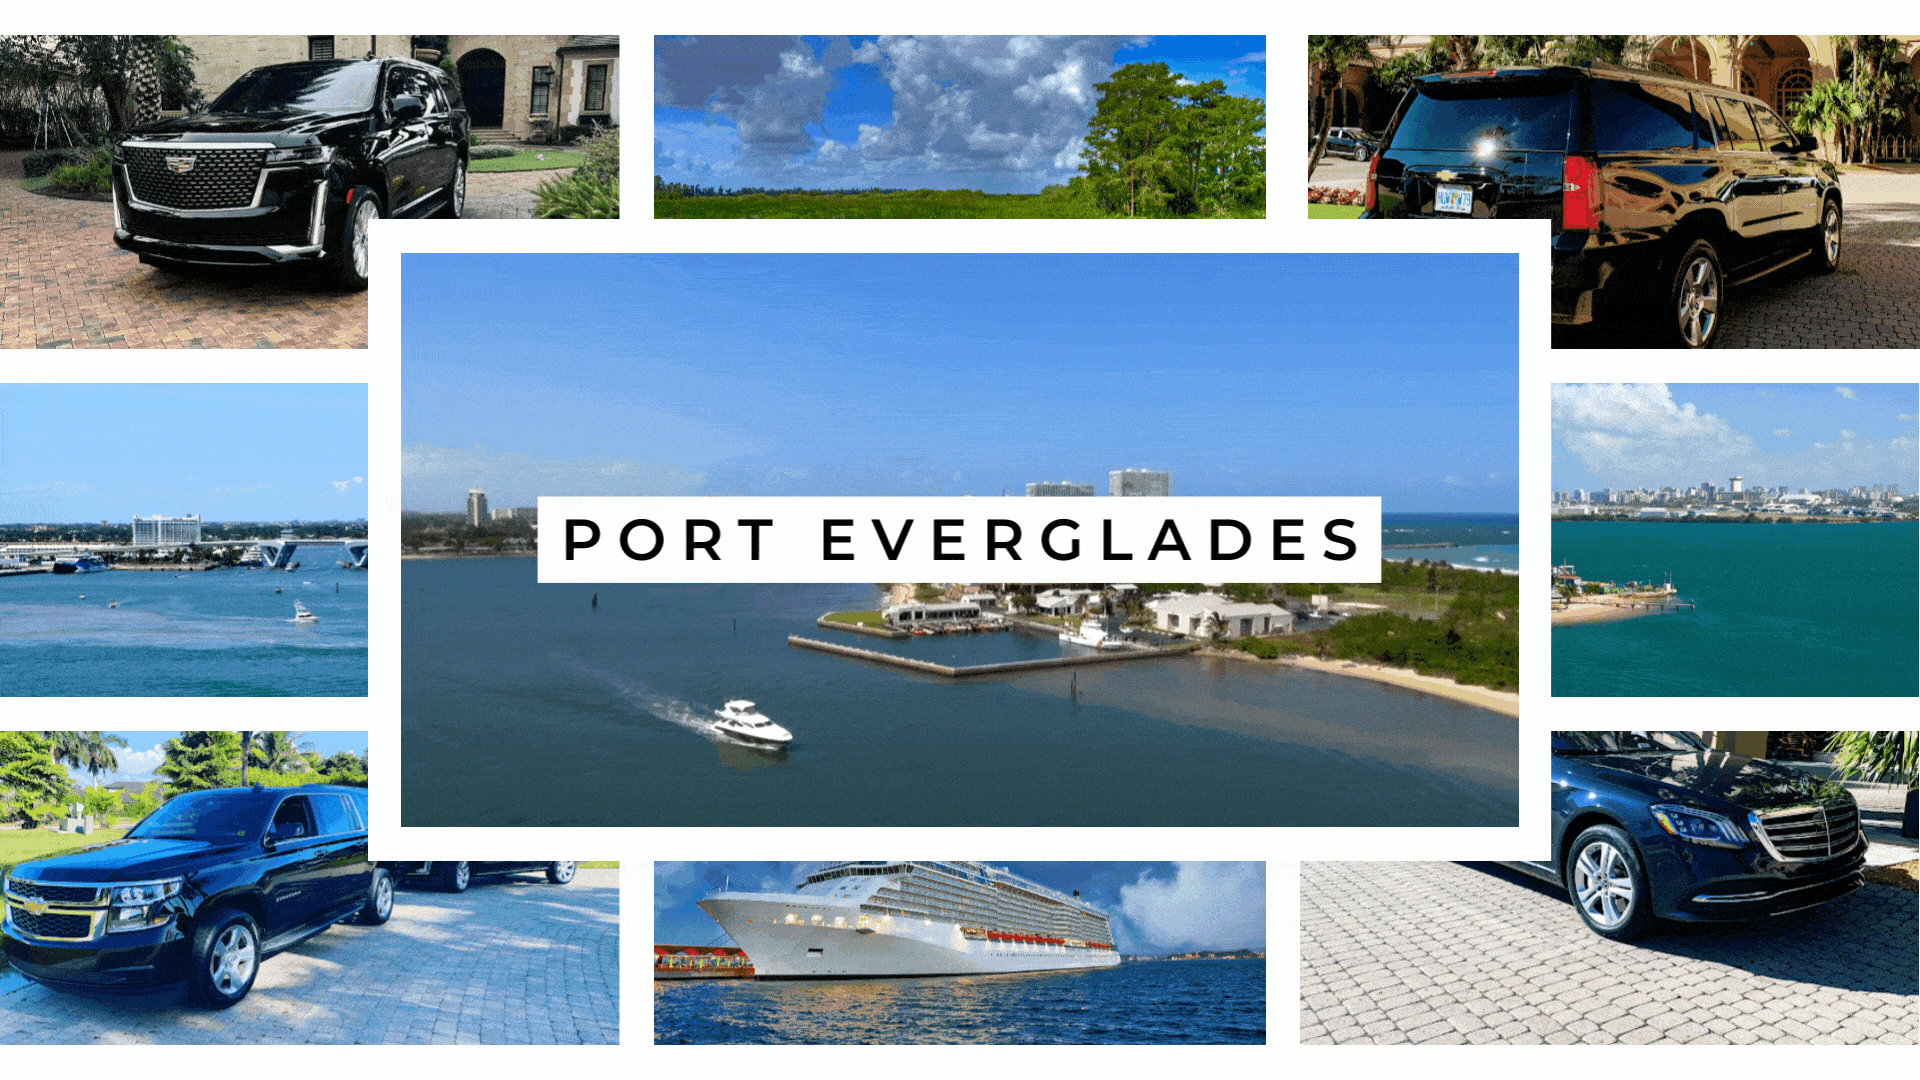 Getting To and From Port Everglades in Luxury